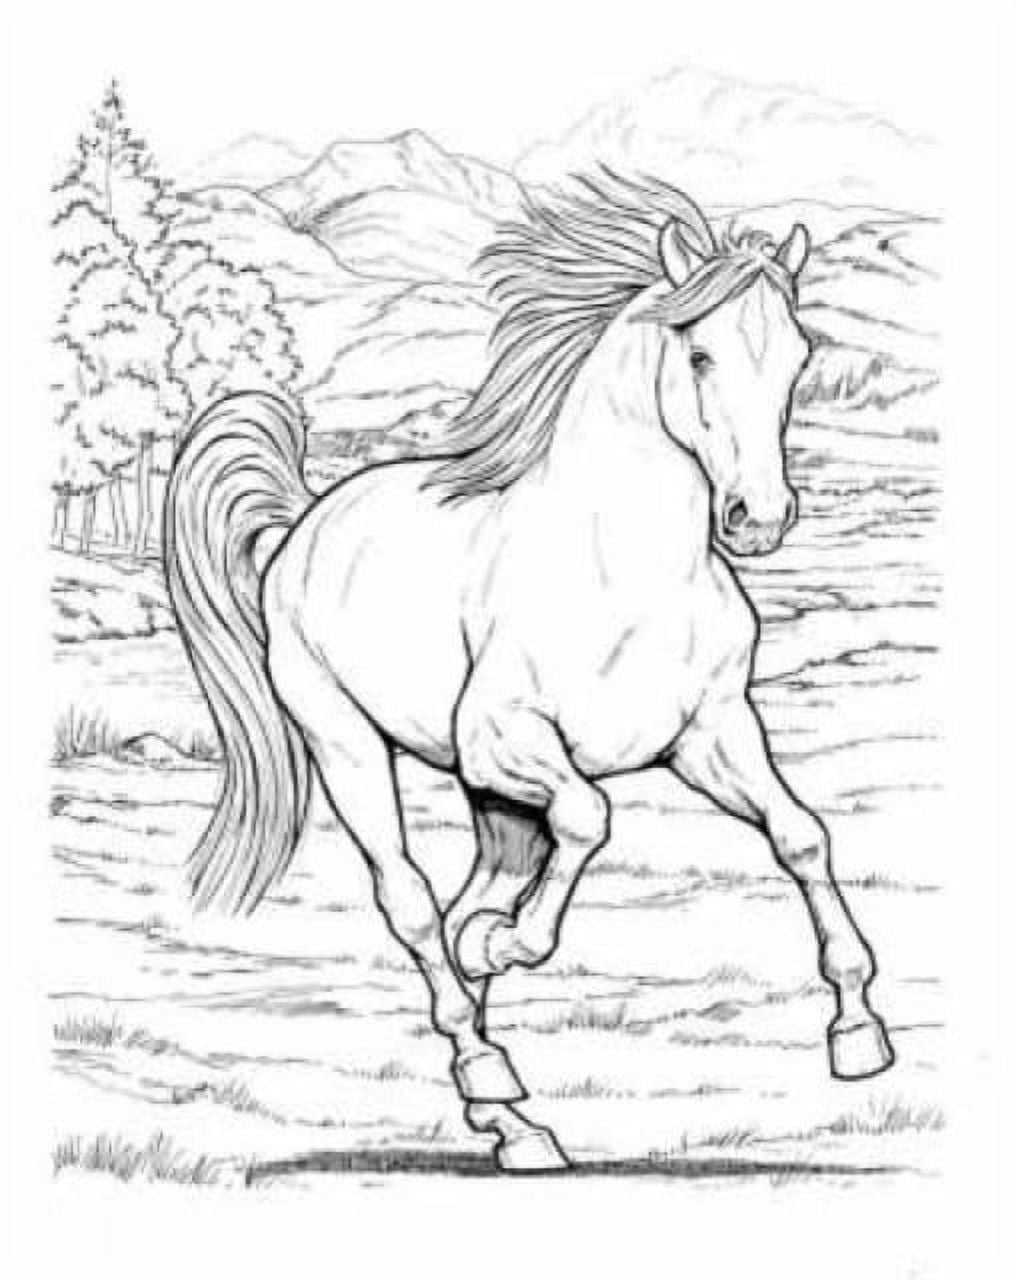 Horse Coloring Book For Boys and Girls: Ages 4-8, 9-12, 13-19 and Adults  (Paperback)